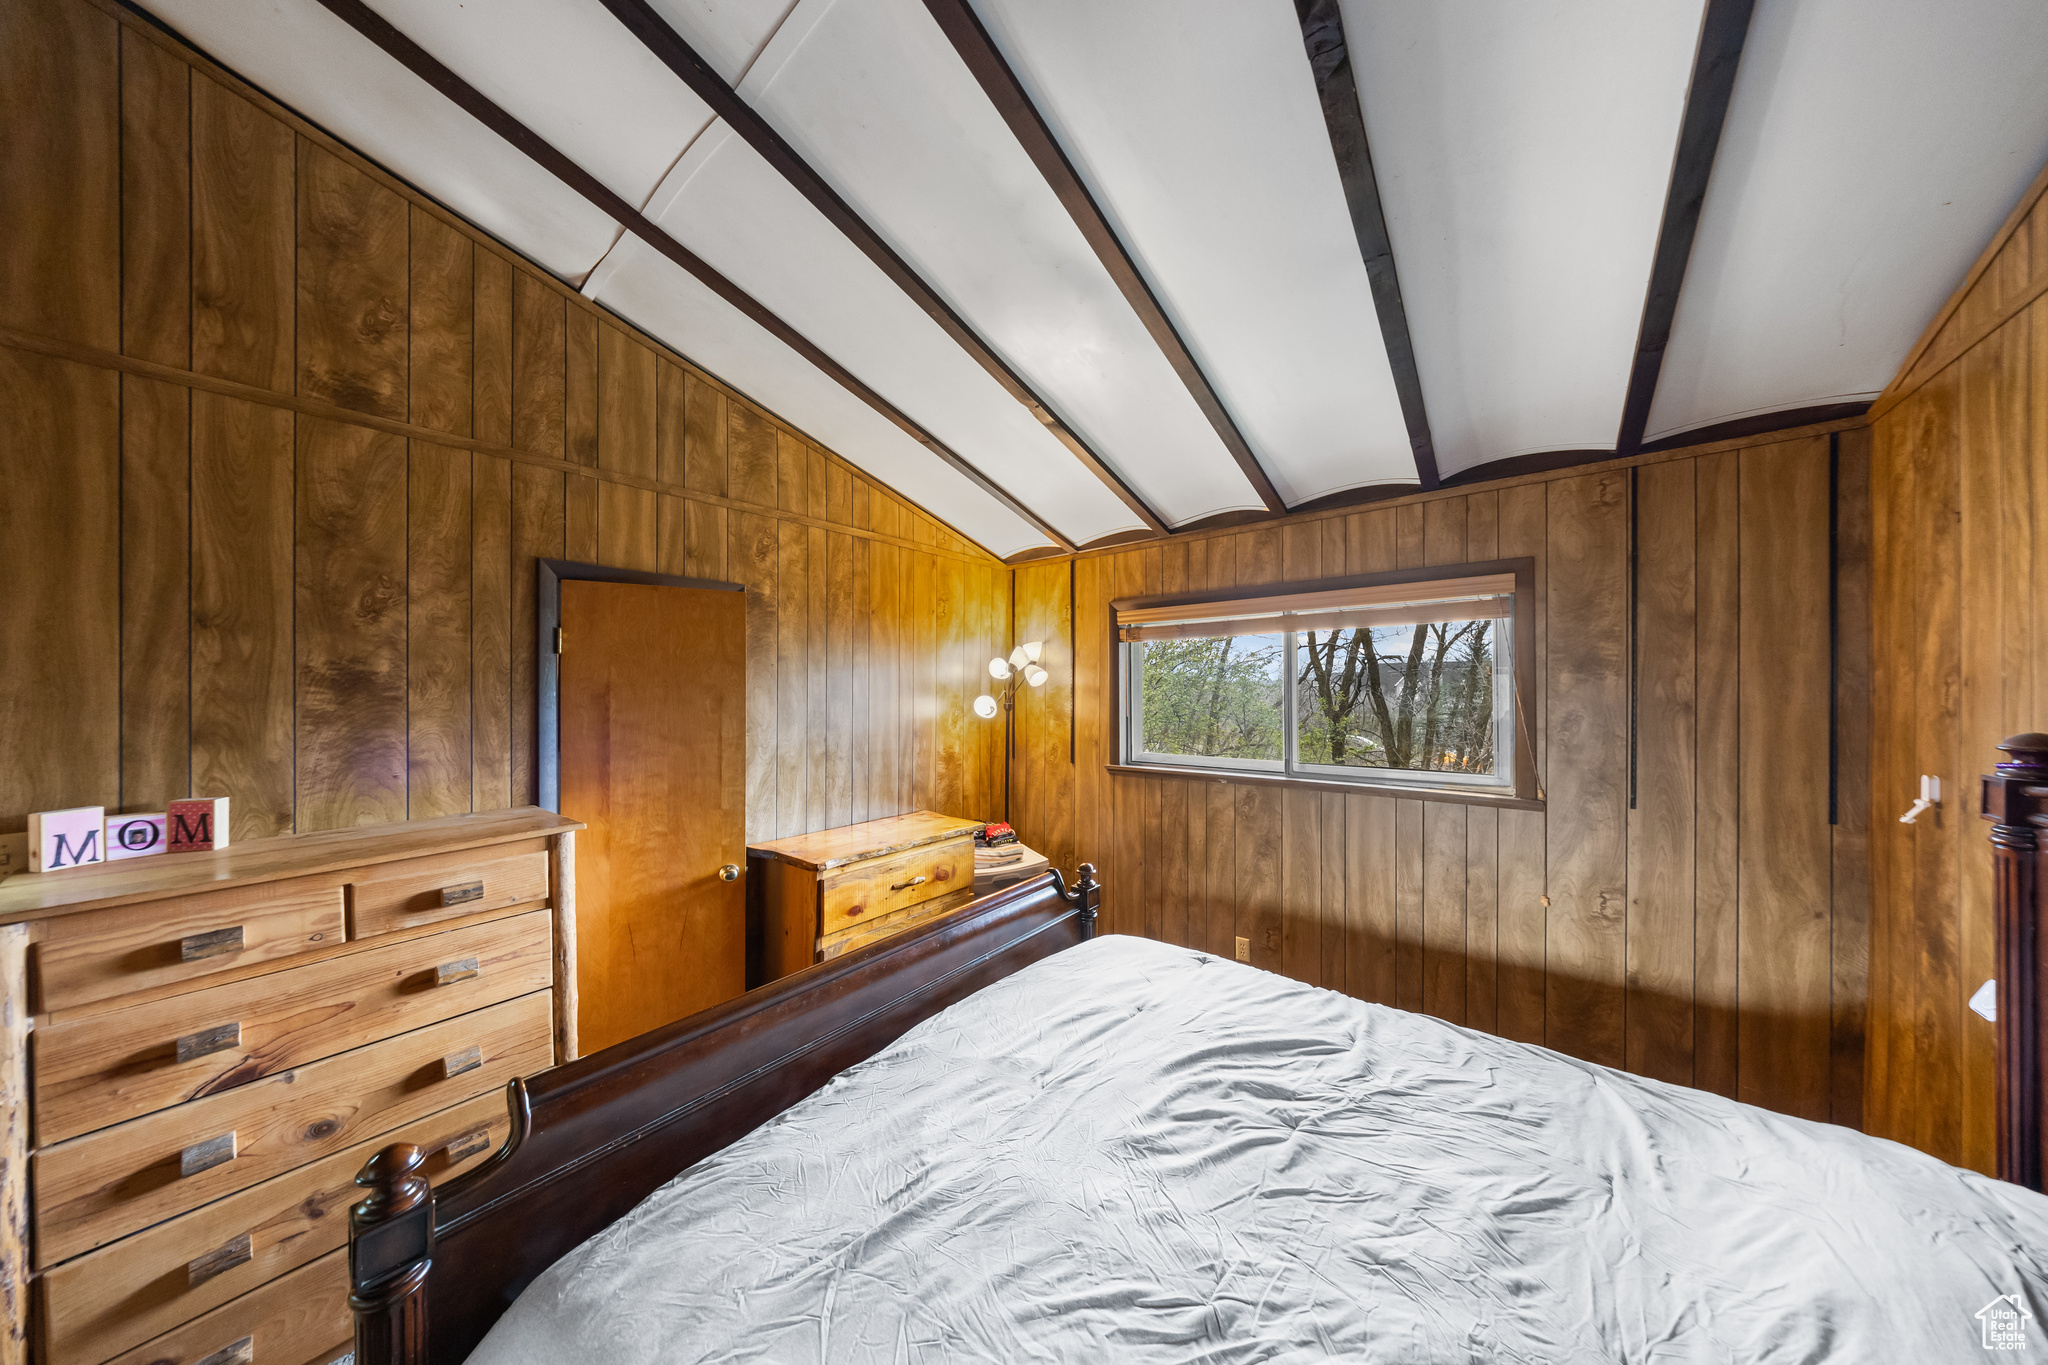 Bedroom with wood walls and vaulted ceiling with beams